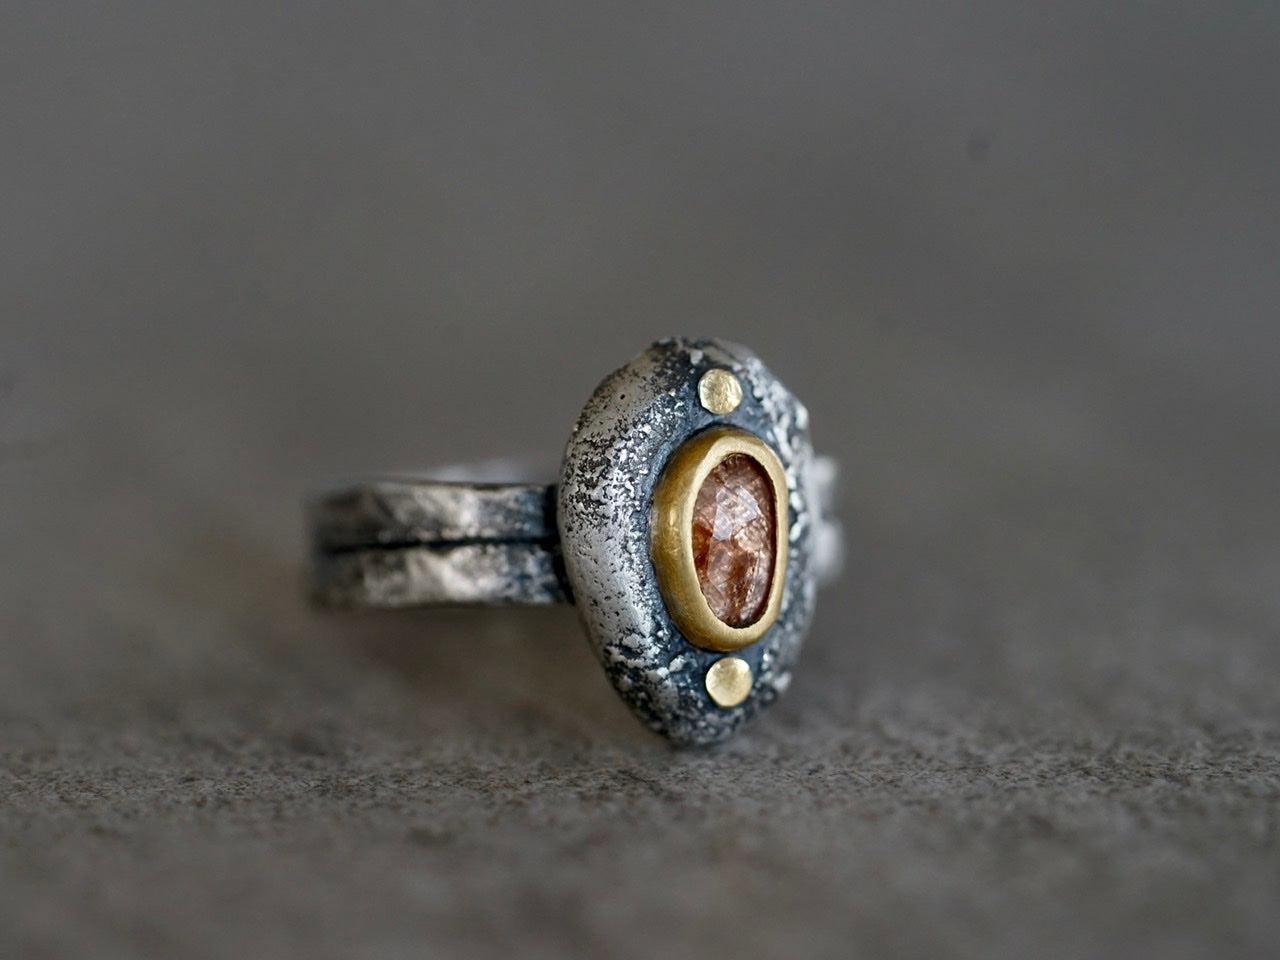 Spinel and 22 k gold pebble ring, size 6.75